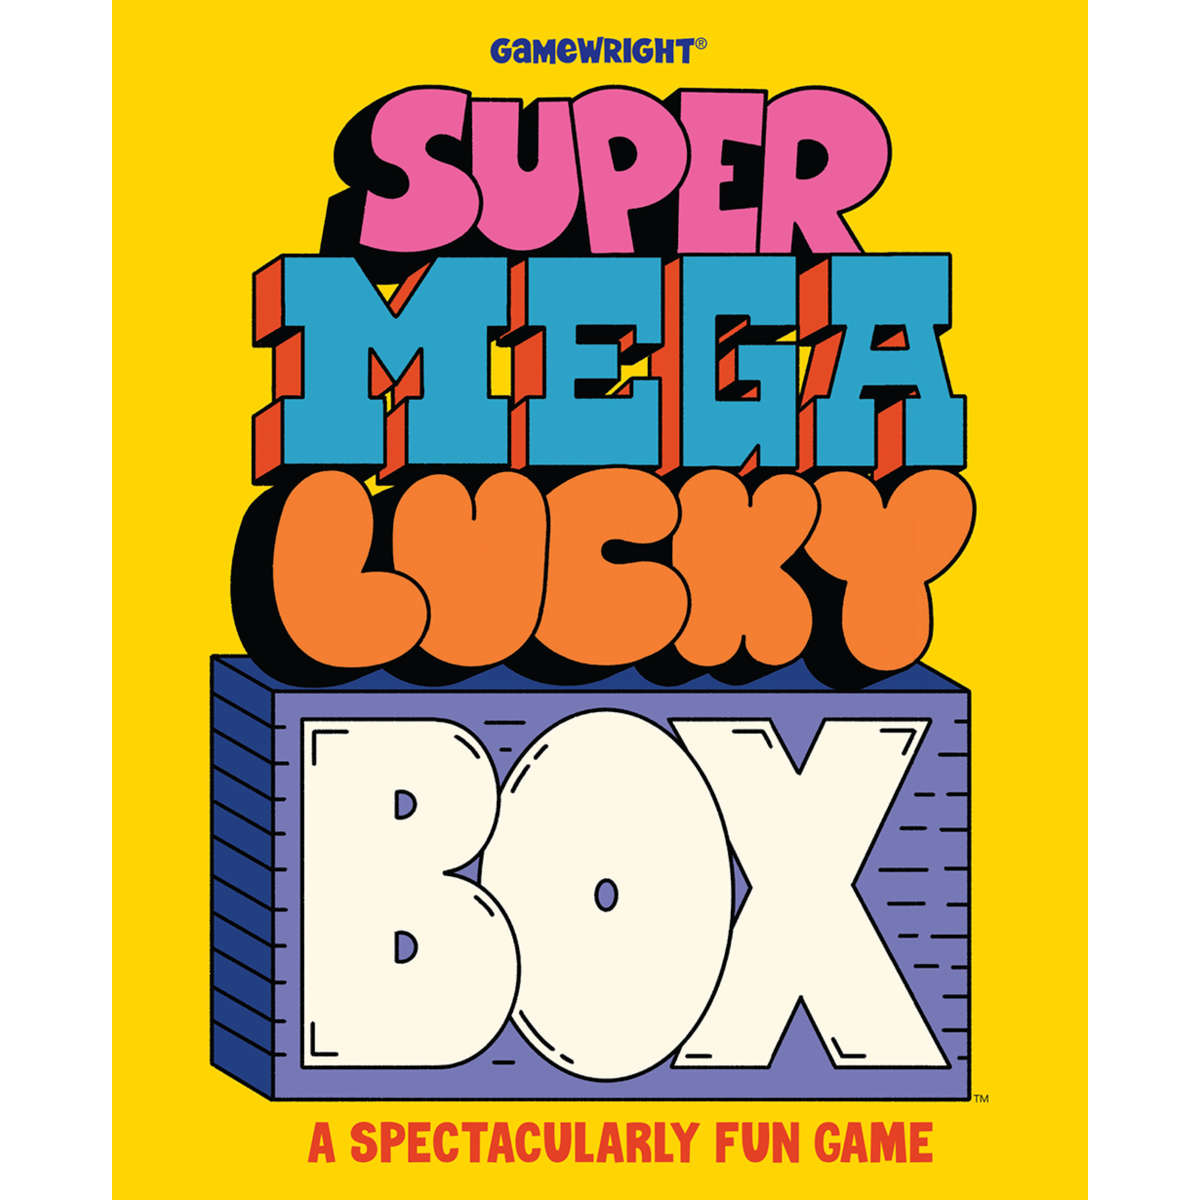 Super Mega Lucky Box by Gamewright